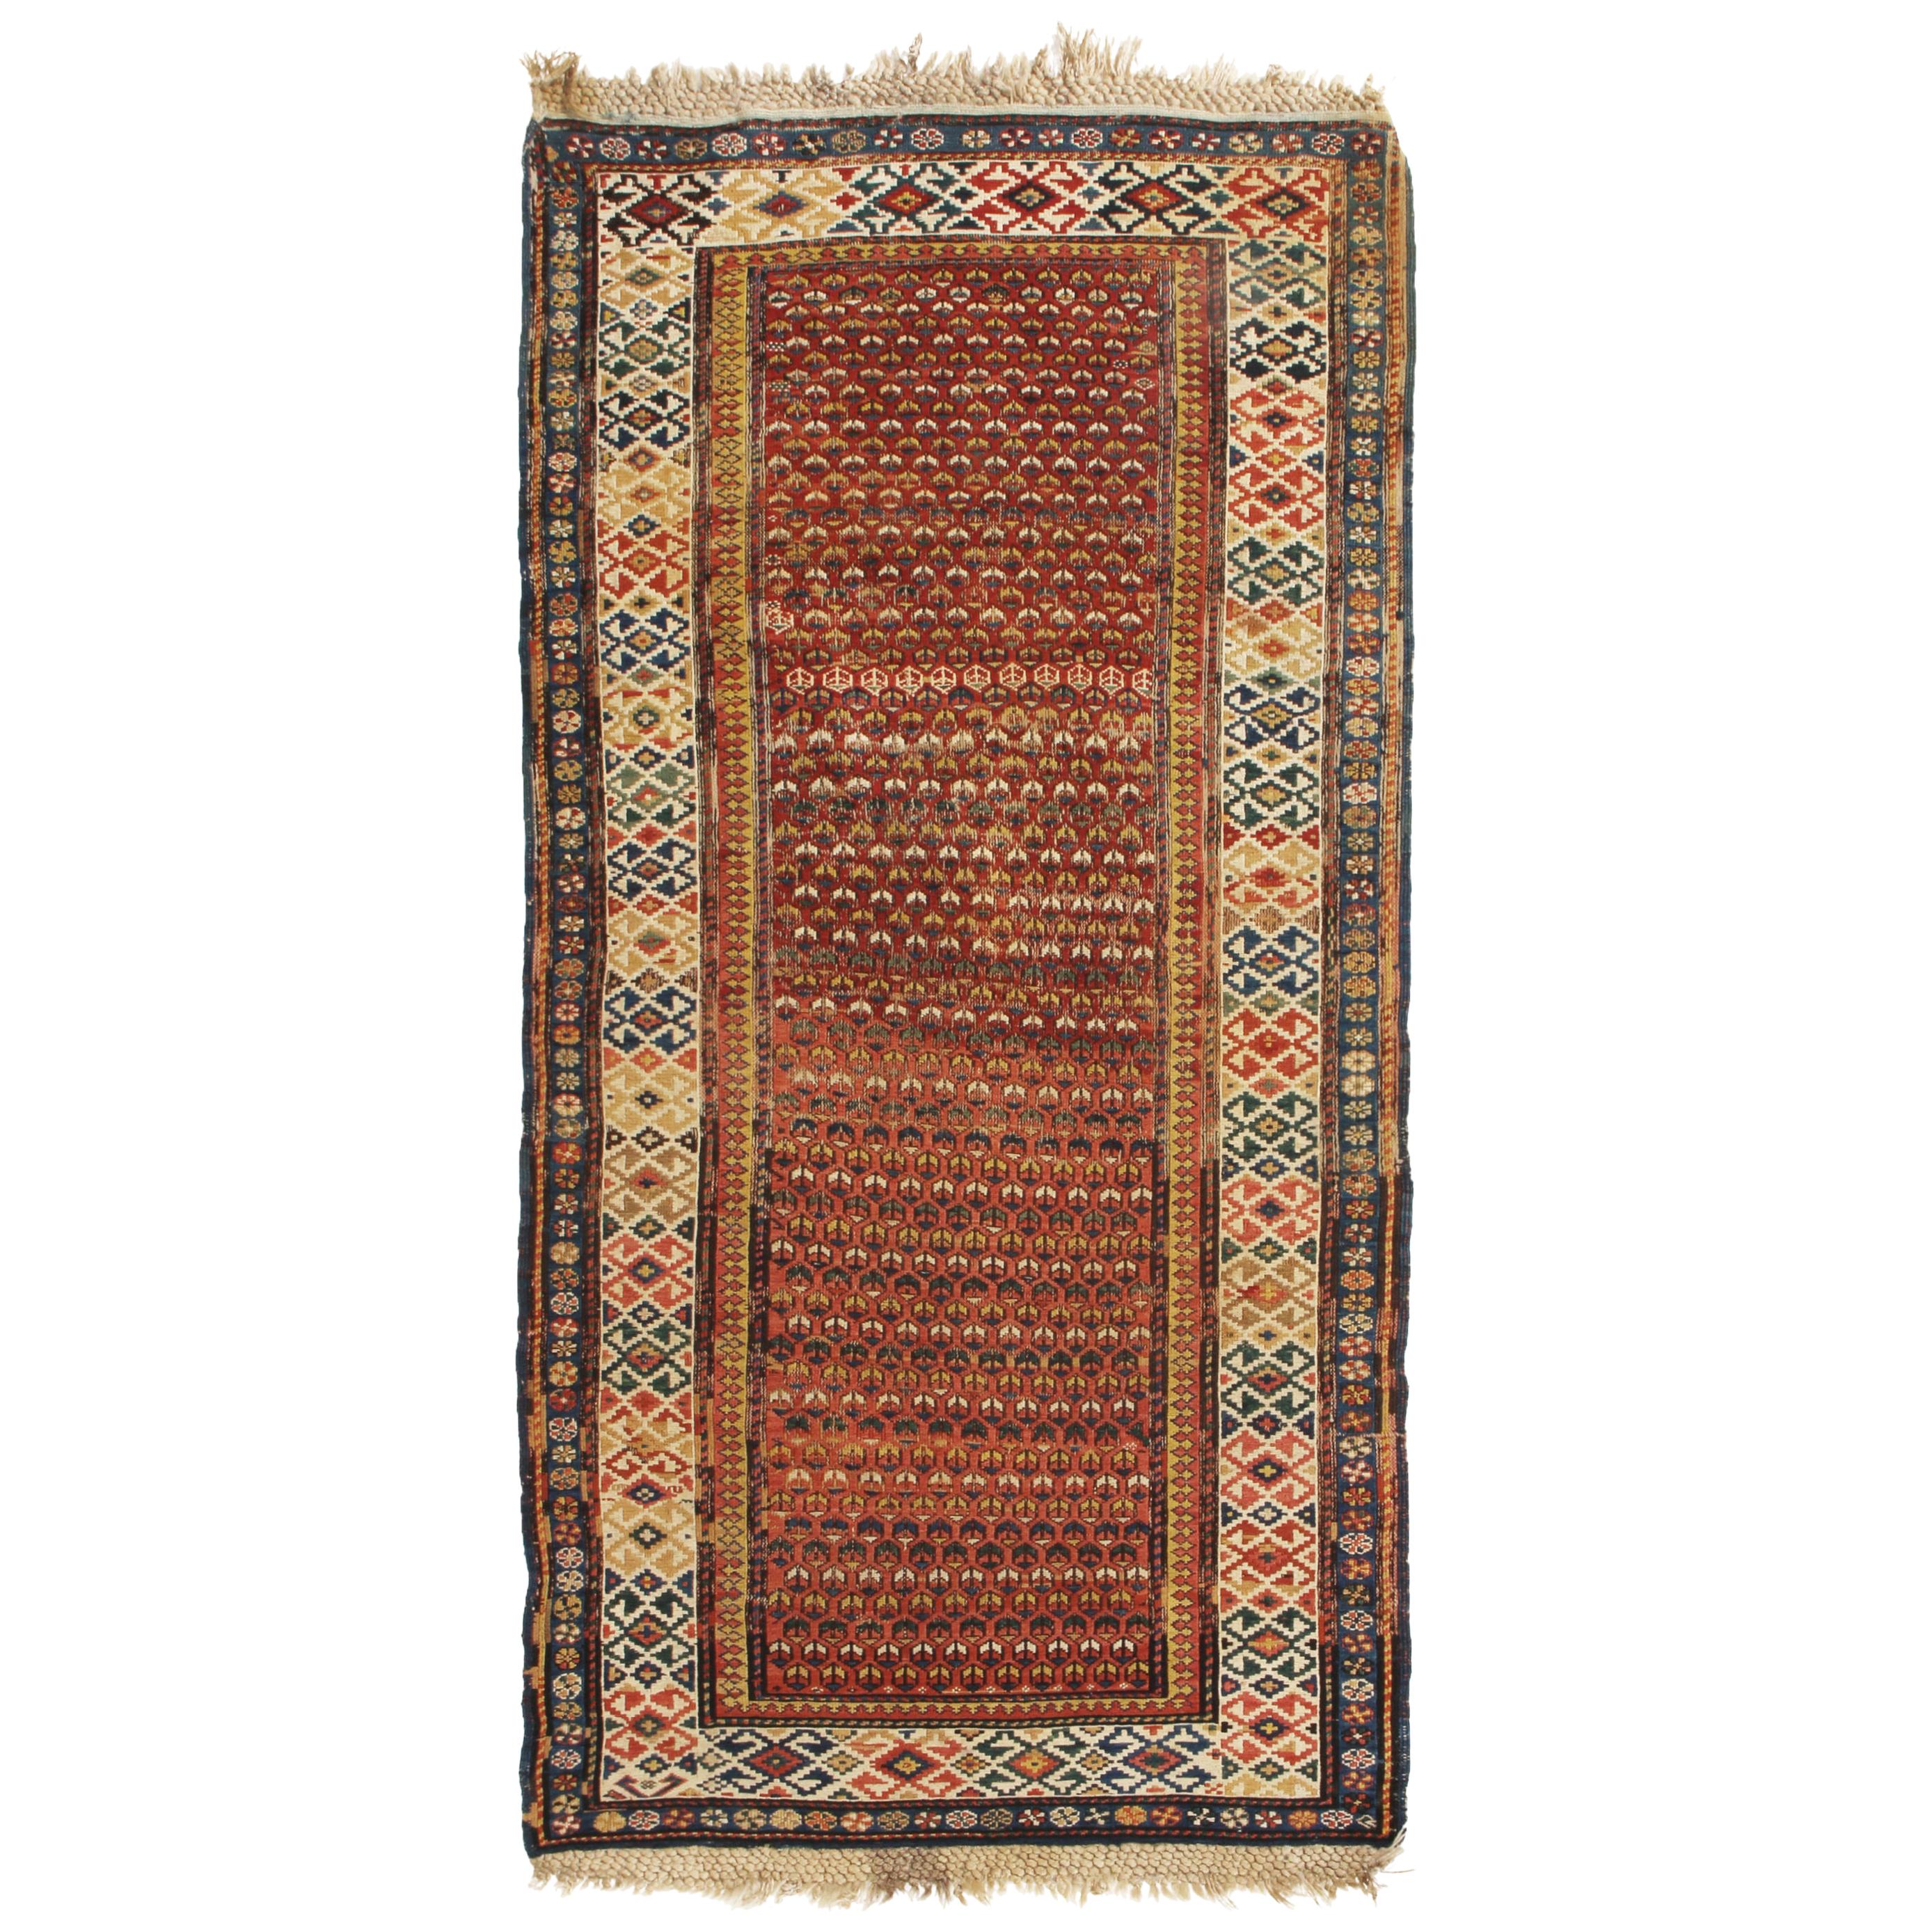 Antique Soumak Traditional Burgundy Red and Blue Wool Rug